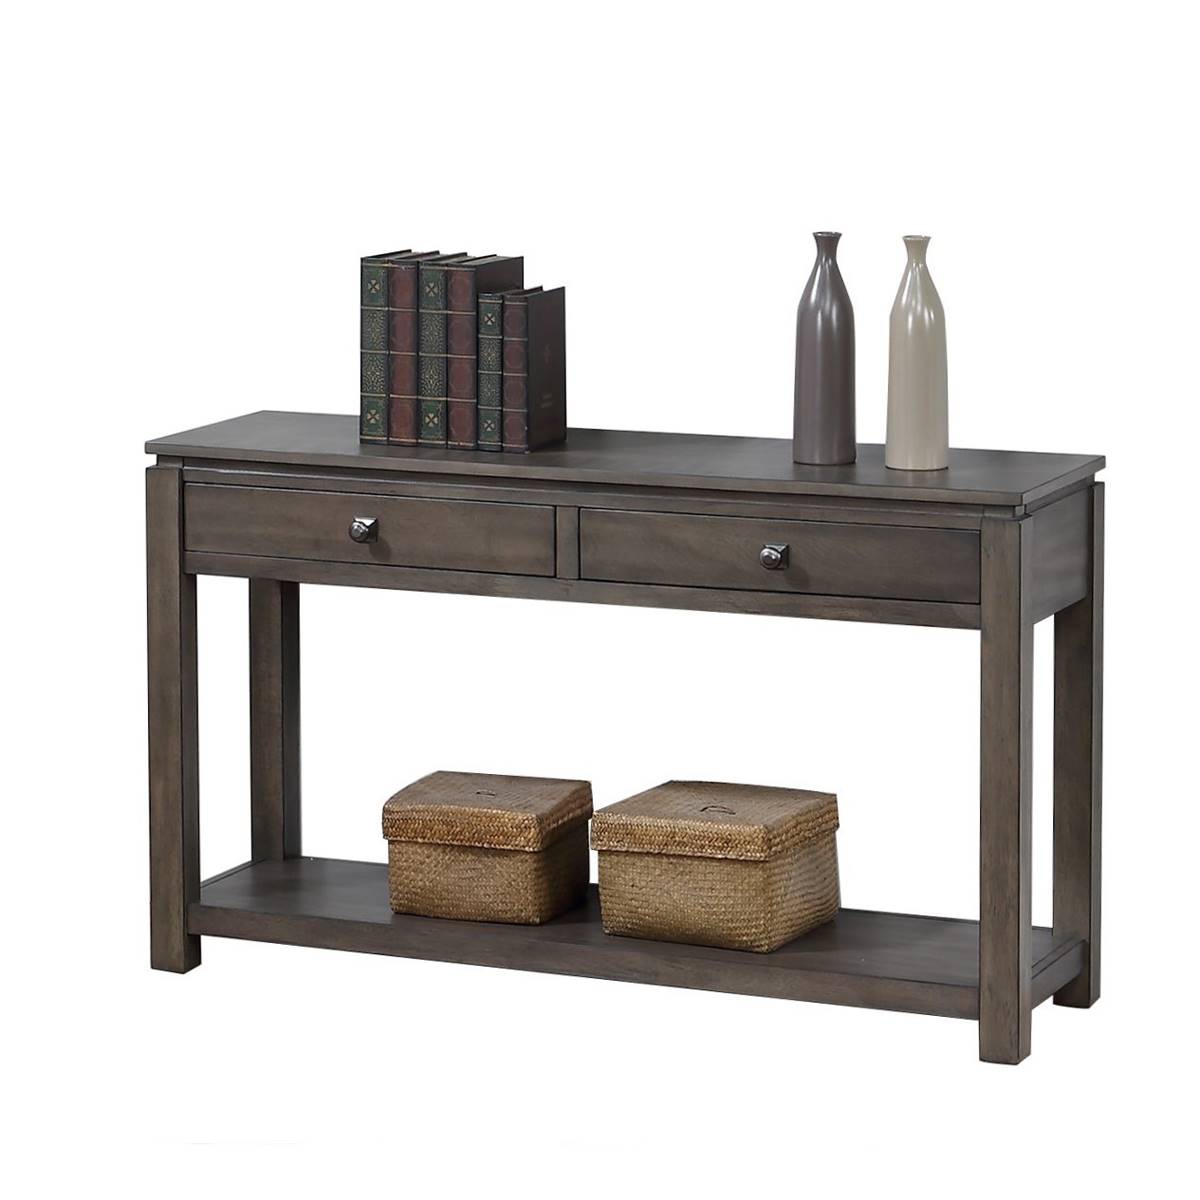 Besthom Shades Of Sand Weathered Wood Console Table